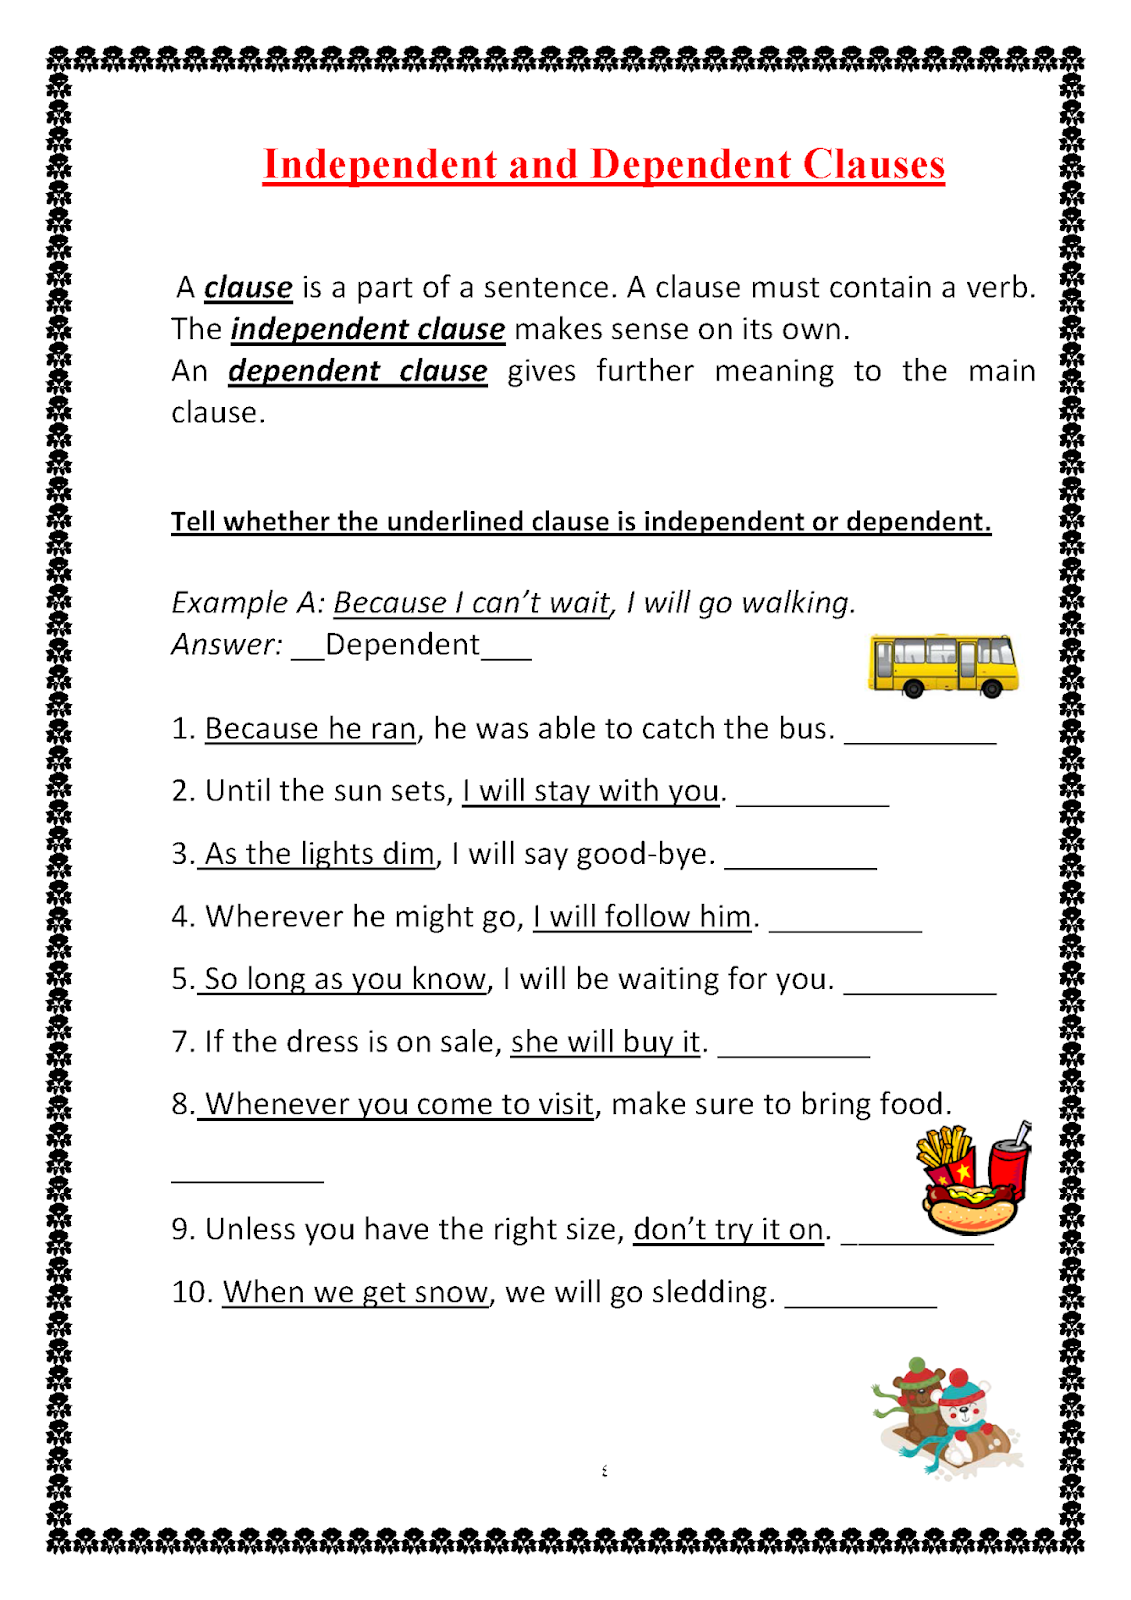 Independent and Dependent (subordinate) Clauses Worksheet